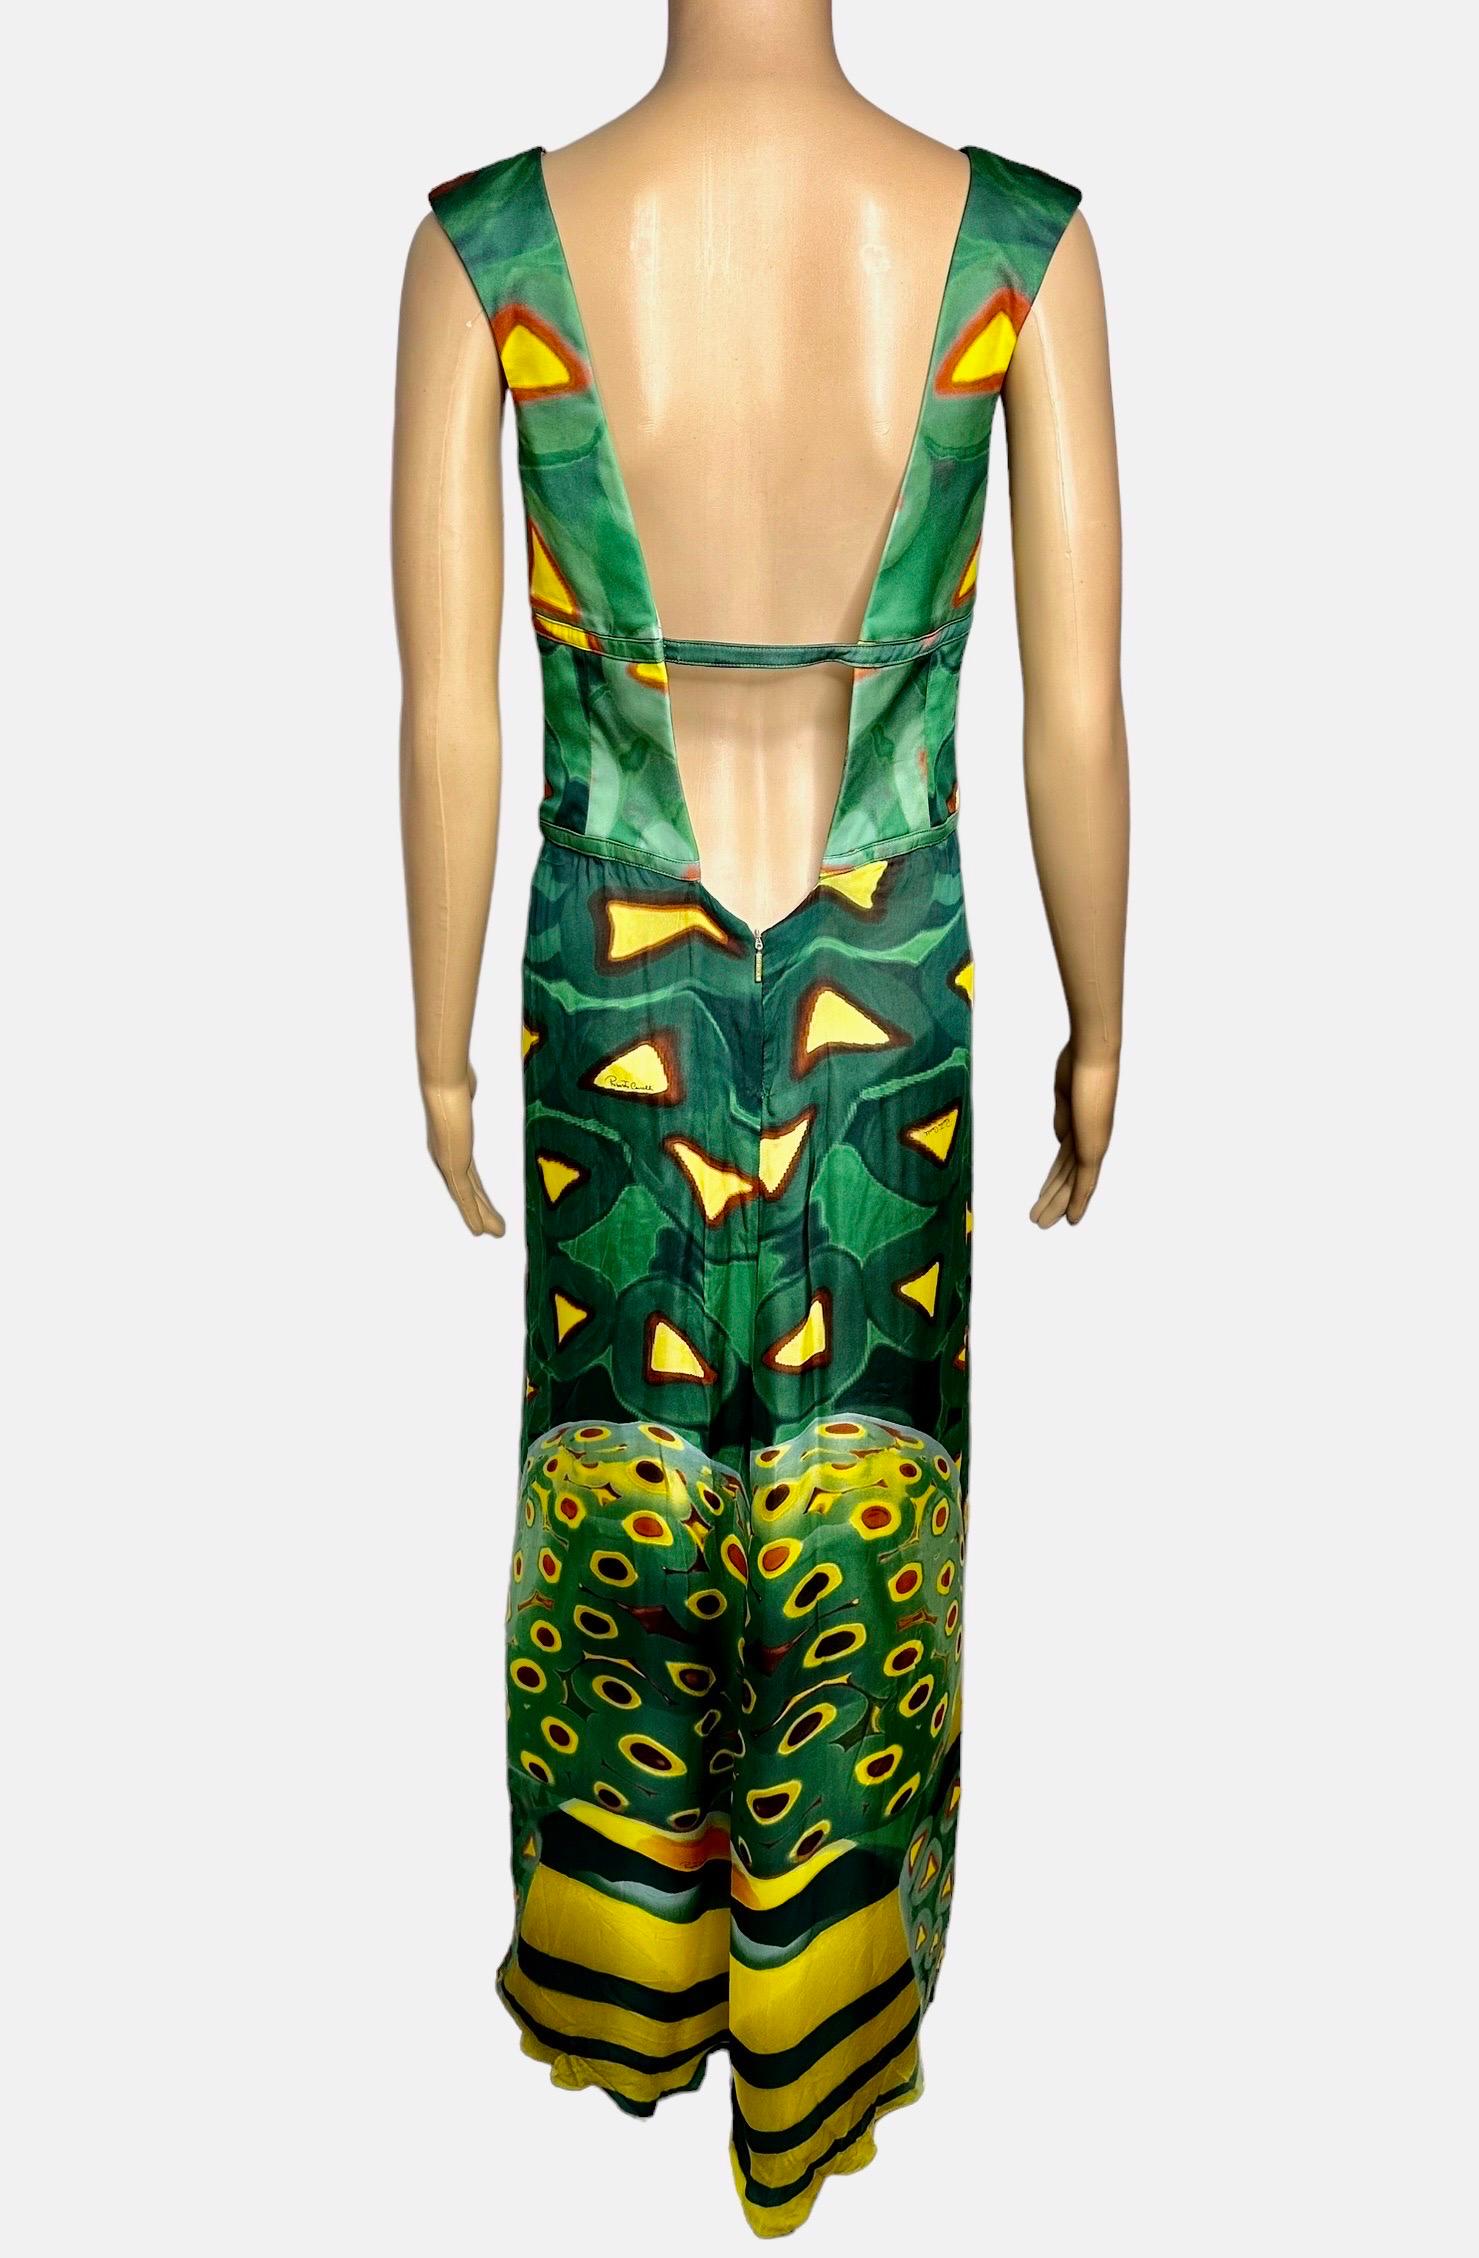 Roberto Cavalli S/S 2009 Plunging Neckline Open Back Evening Dress Gown For Sale 3